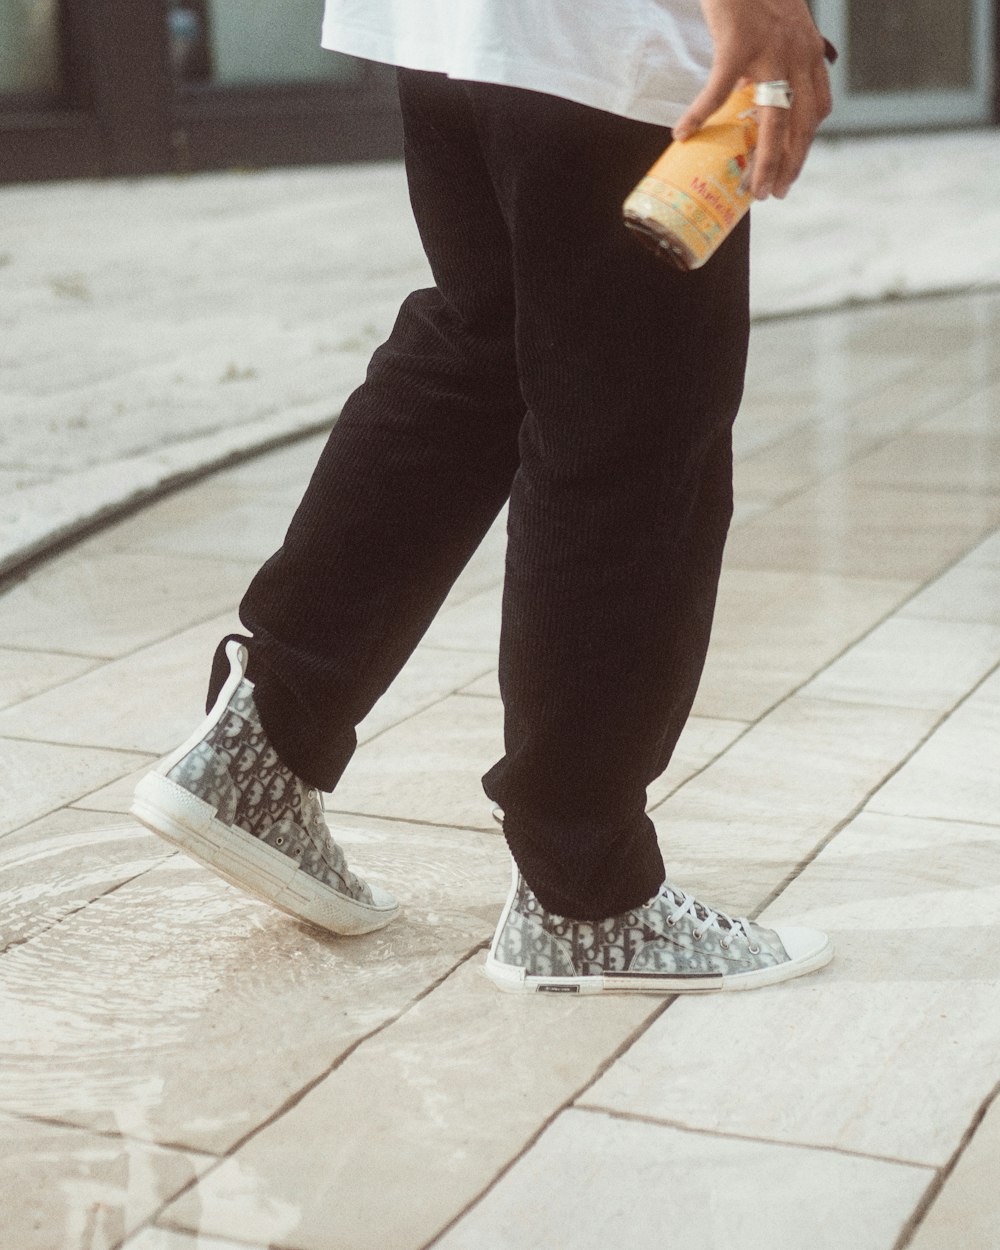 person in black pants and gray and white sneakers